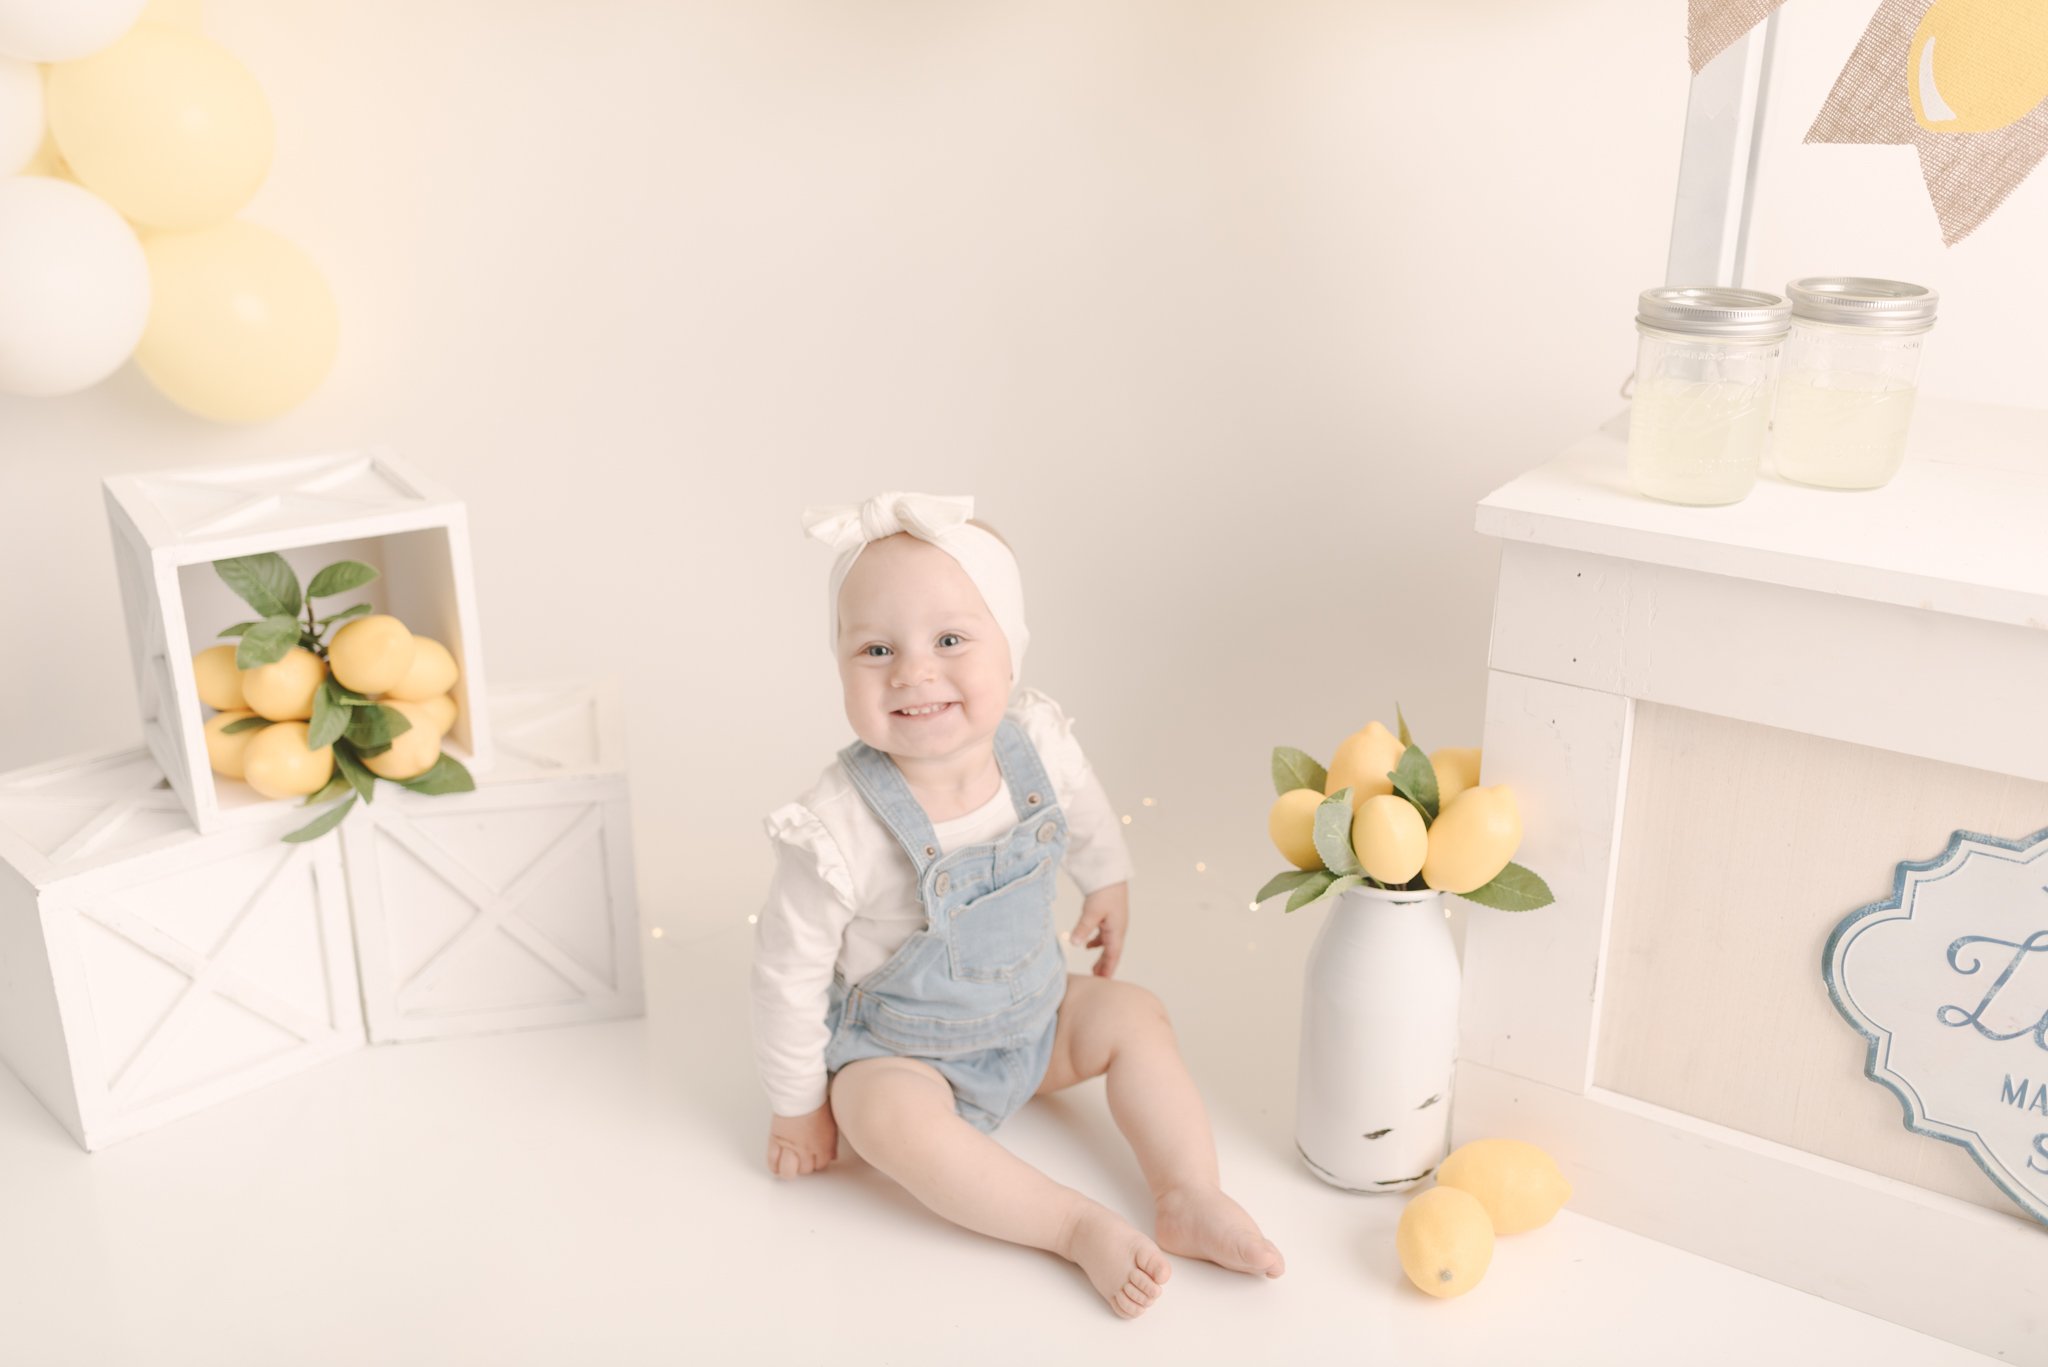 Lemonade_Stand_Frist_Birthday_Girl_Smash_and_Splash_Session_Cake_Studio_by_Erika_Child_and_Family_Photographer_for_Christie_Leigh_Photo_in_Warren_OH_Ohio_Trumbull_County_004.jpg